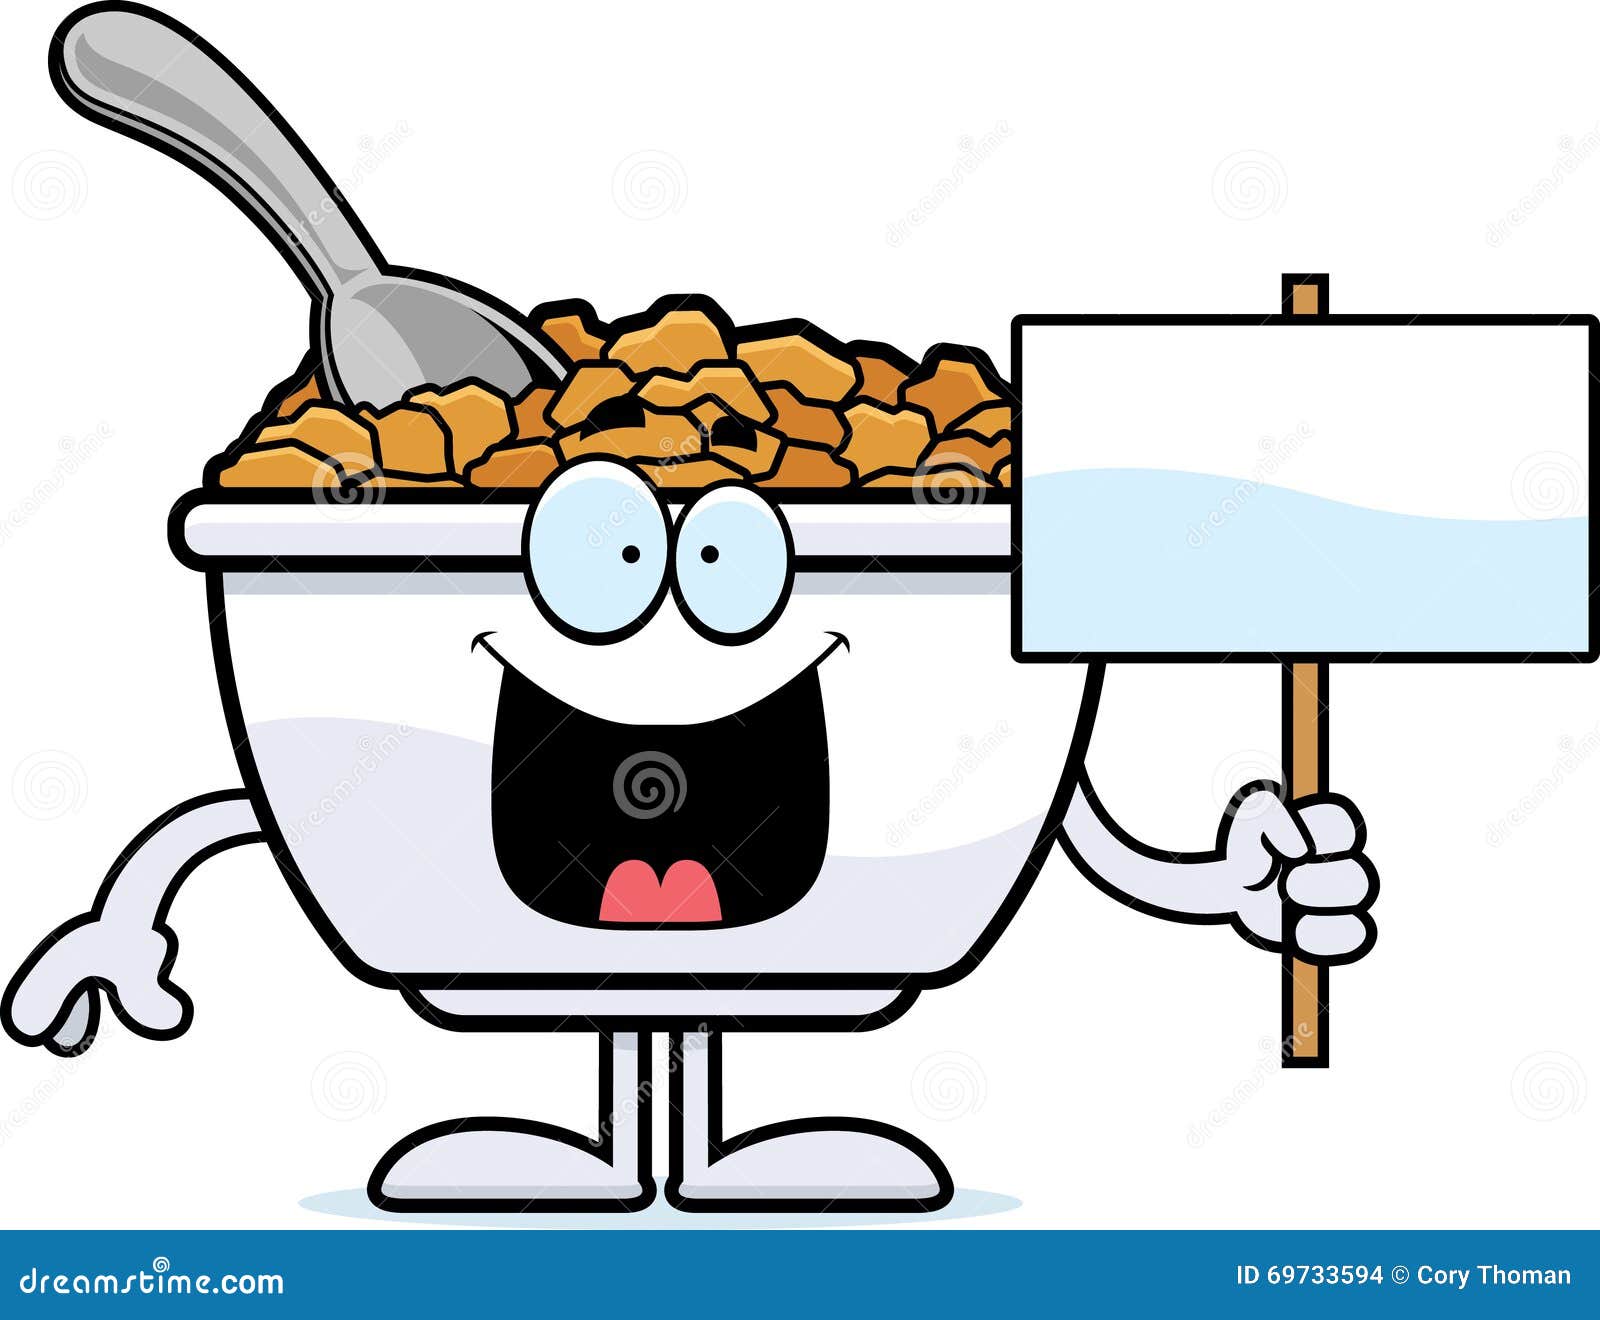 Cartoon Cereal Sign stock vector. Illustration of clip - 69733594